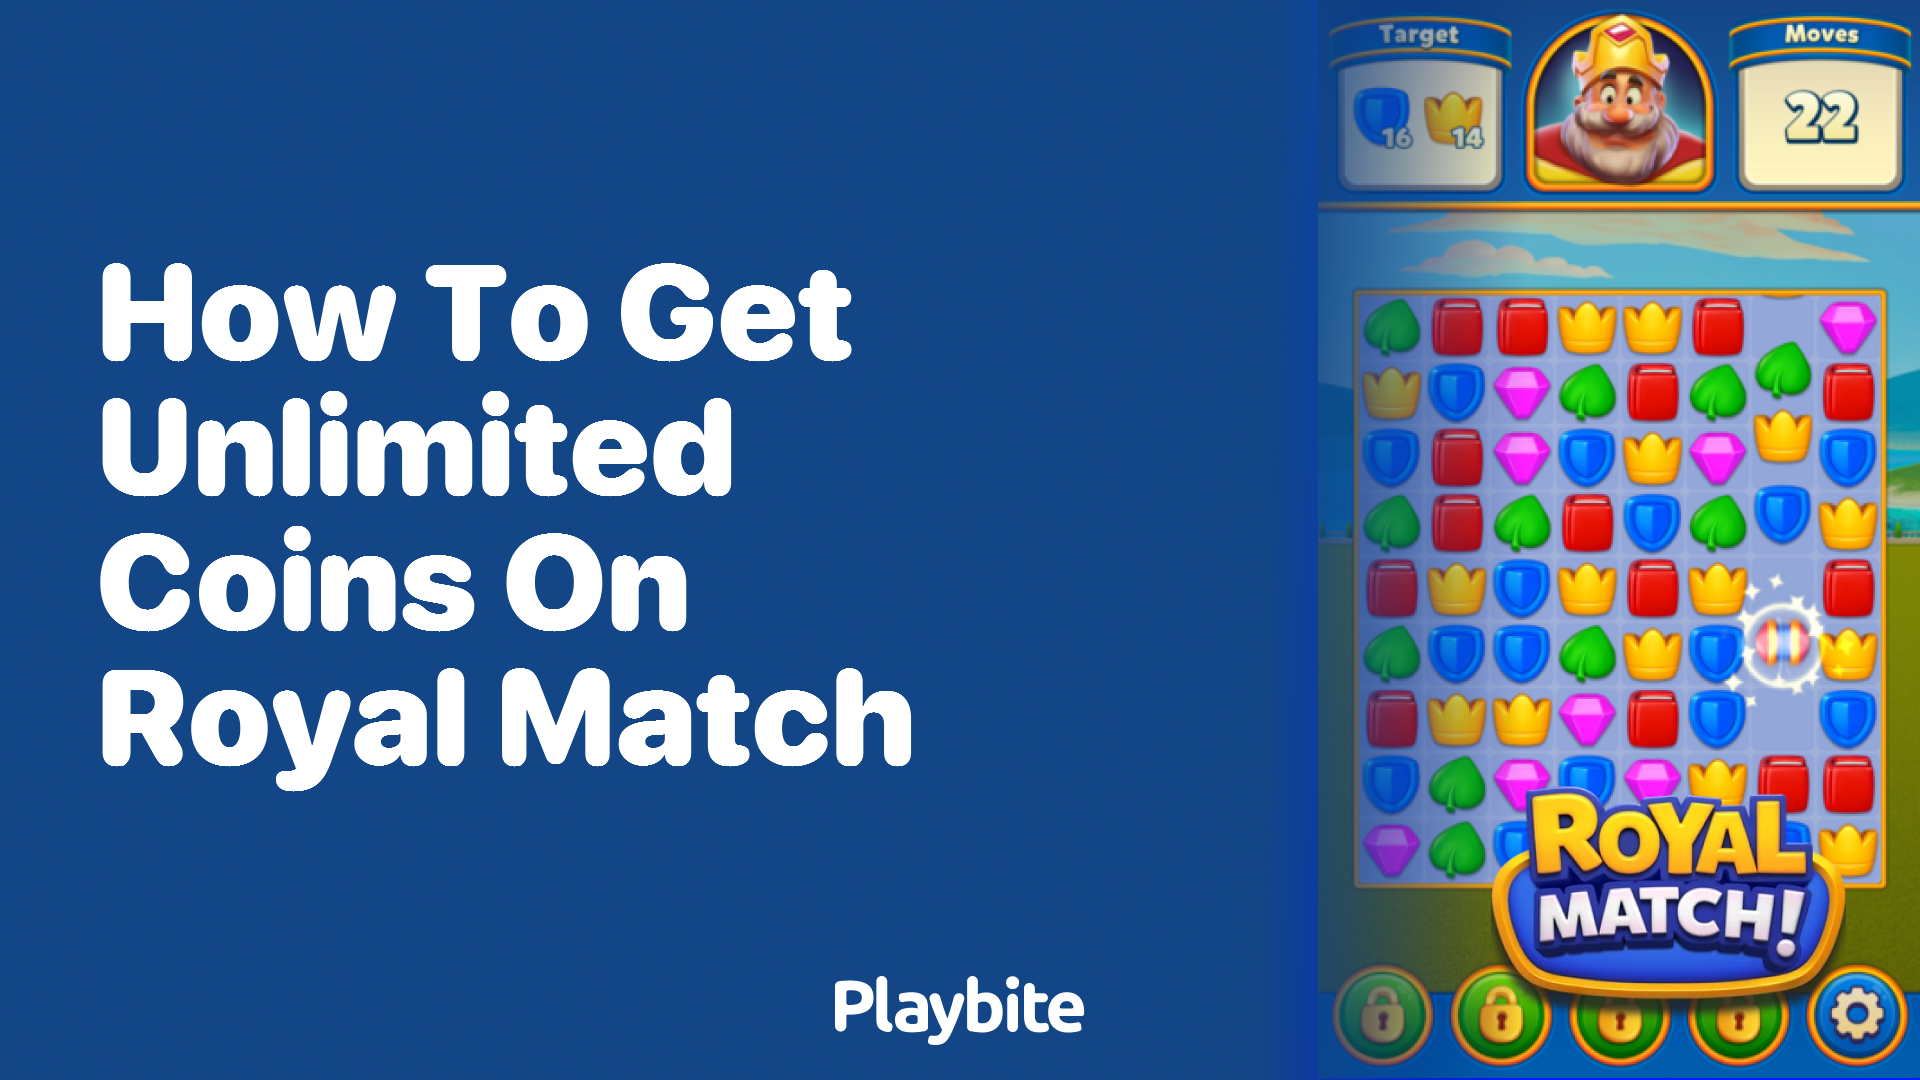 How to Get Unlimited Coins on Royal Match